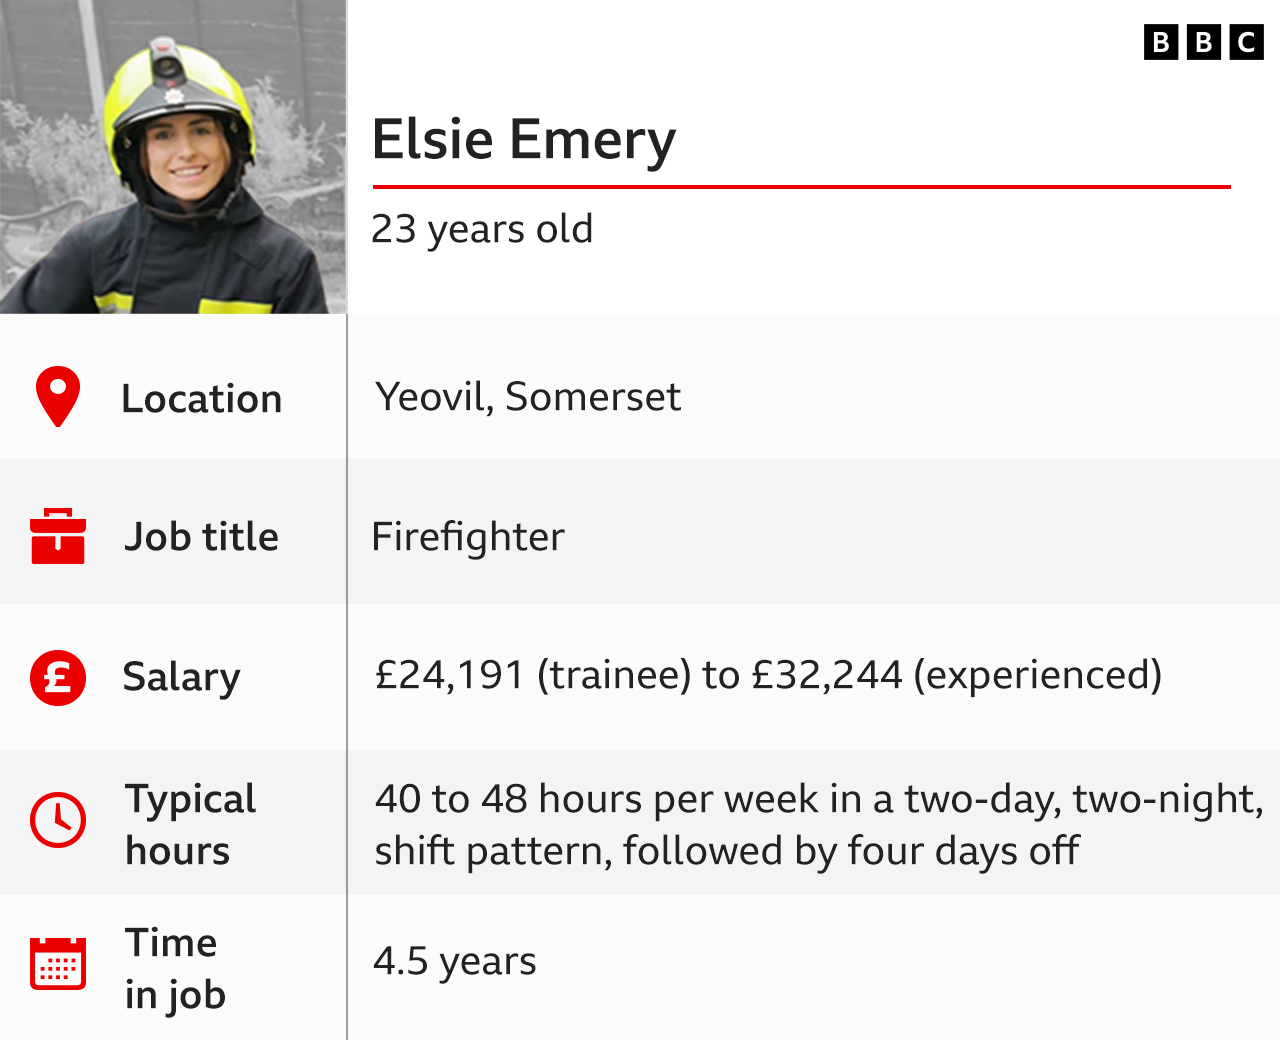 Fact card about firefighter role